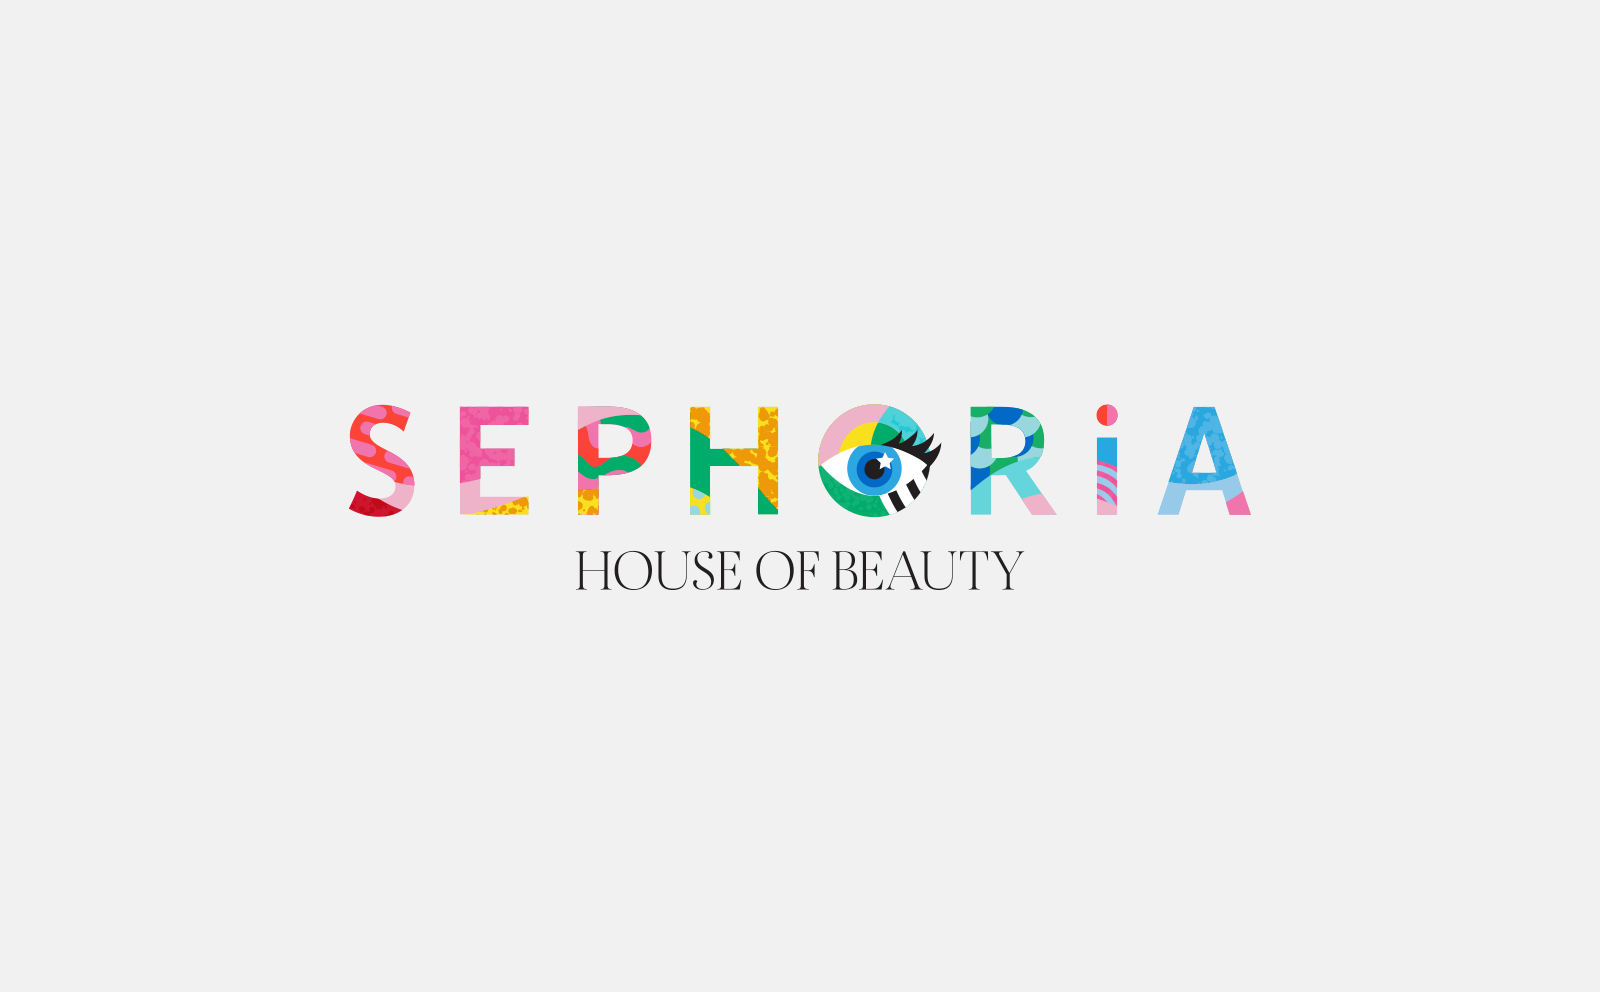 Sephora Goes Big for Year Two of SEPHORiA